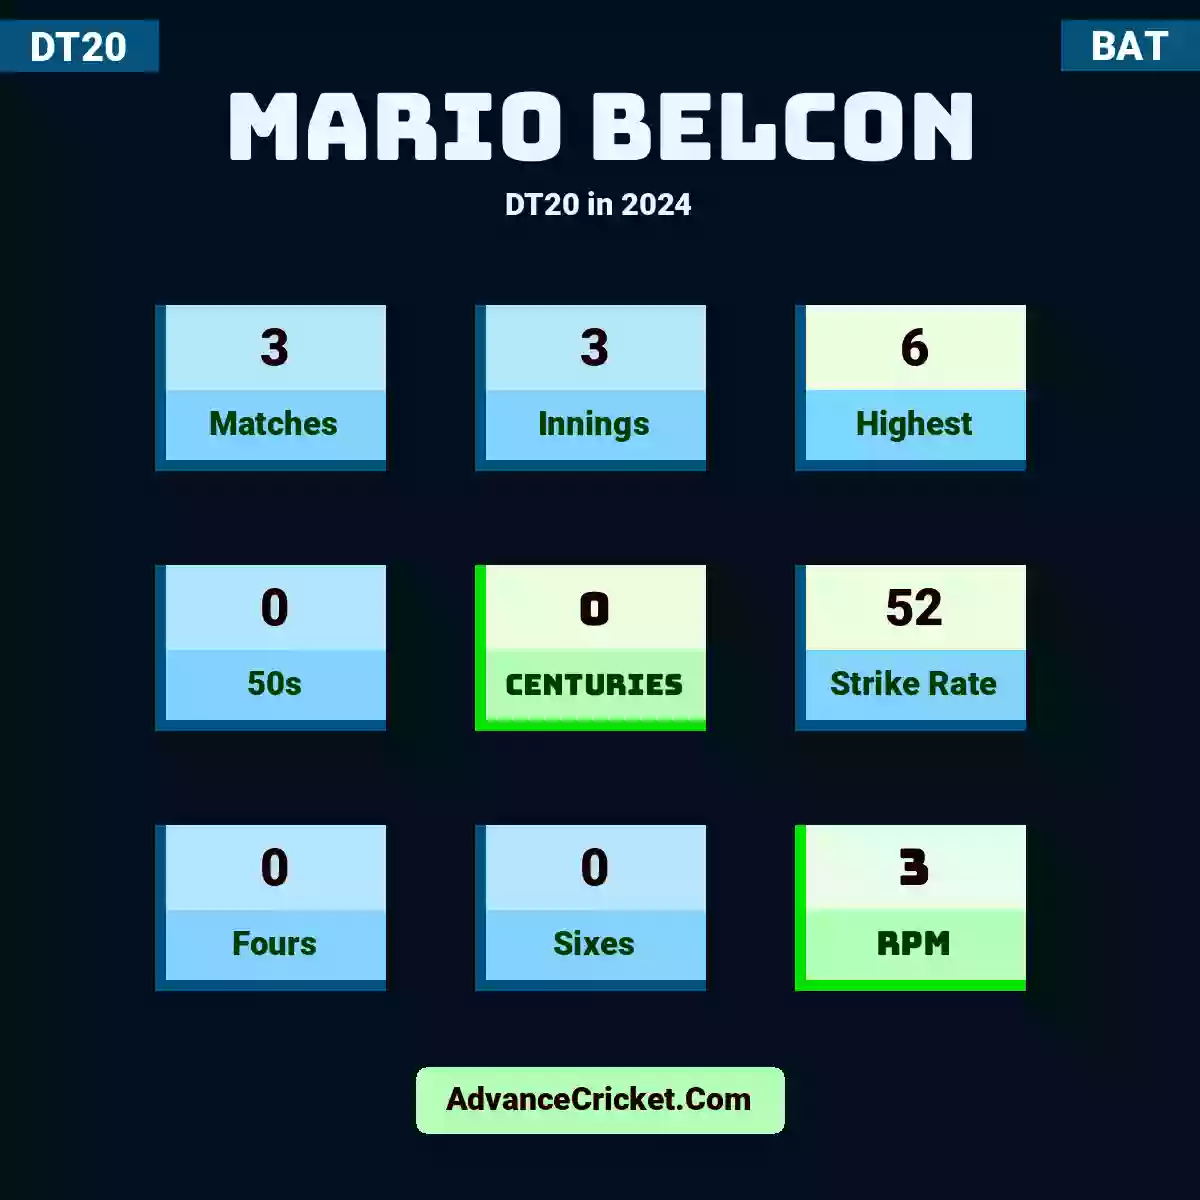 Mario Belcon DT20  in 2024, Mario Belcon played 3 matches, scored 6 runs as highest, 0 half-centuries, and 0 centuries, with a strike rate of 52. m.belcon hit 0 fours and 0 sixes, with an RPM of 3.